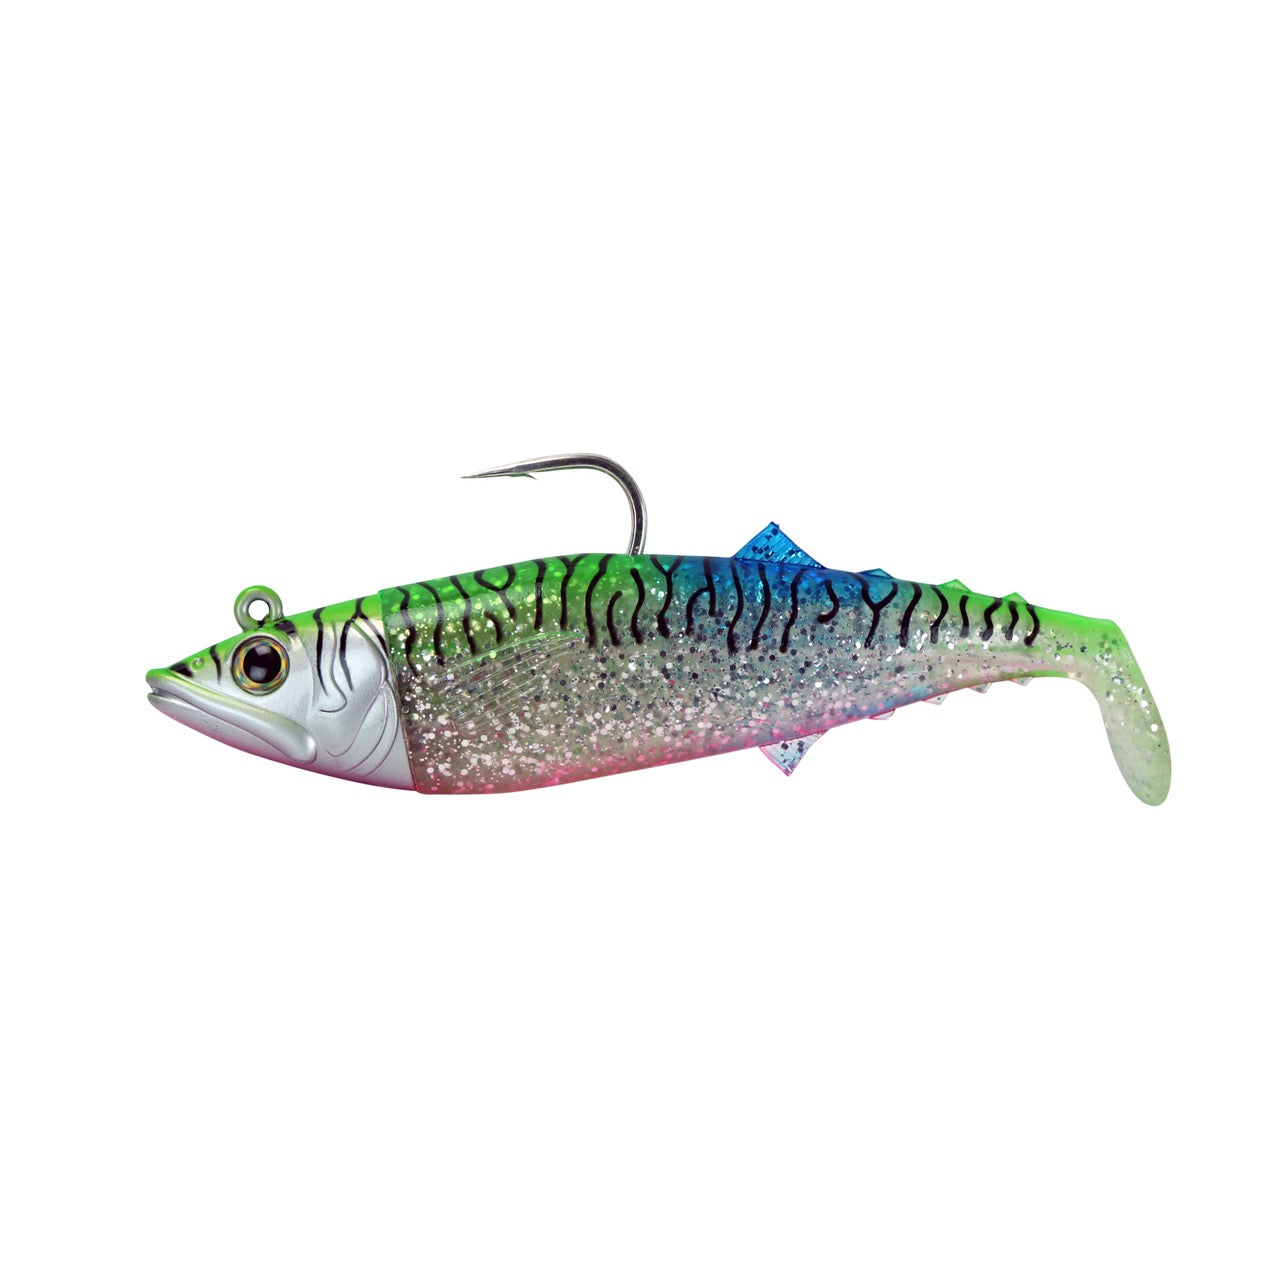 Large Marlin Lure Pack by Bost - Rigged w/Double Hooks, Diving